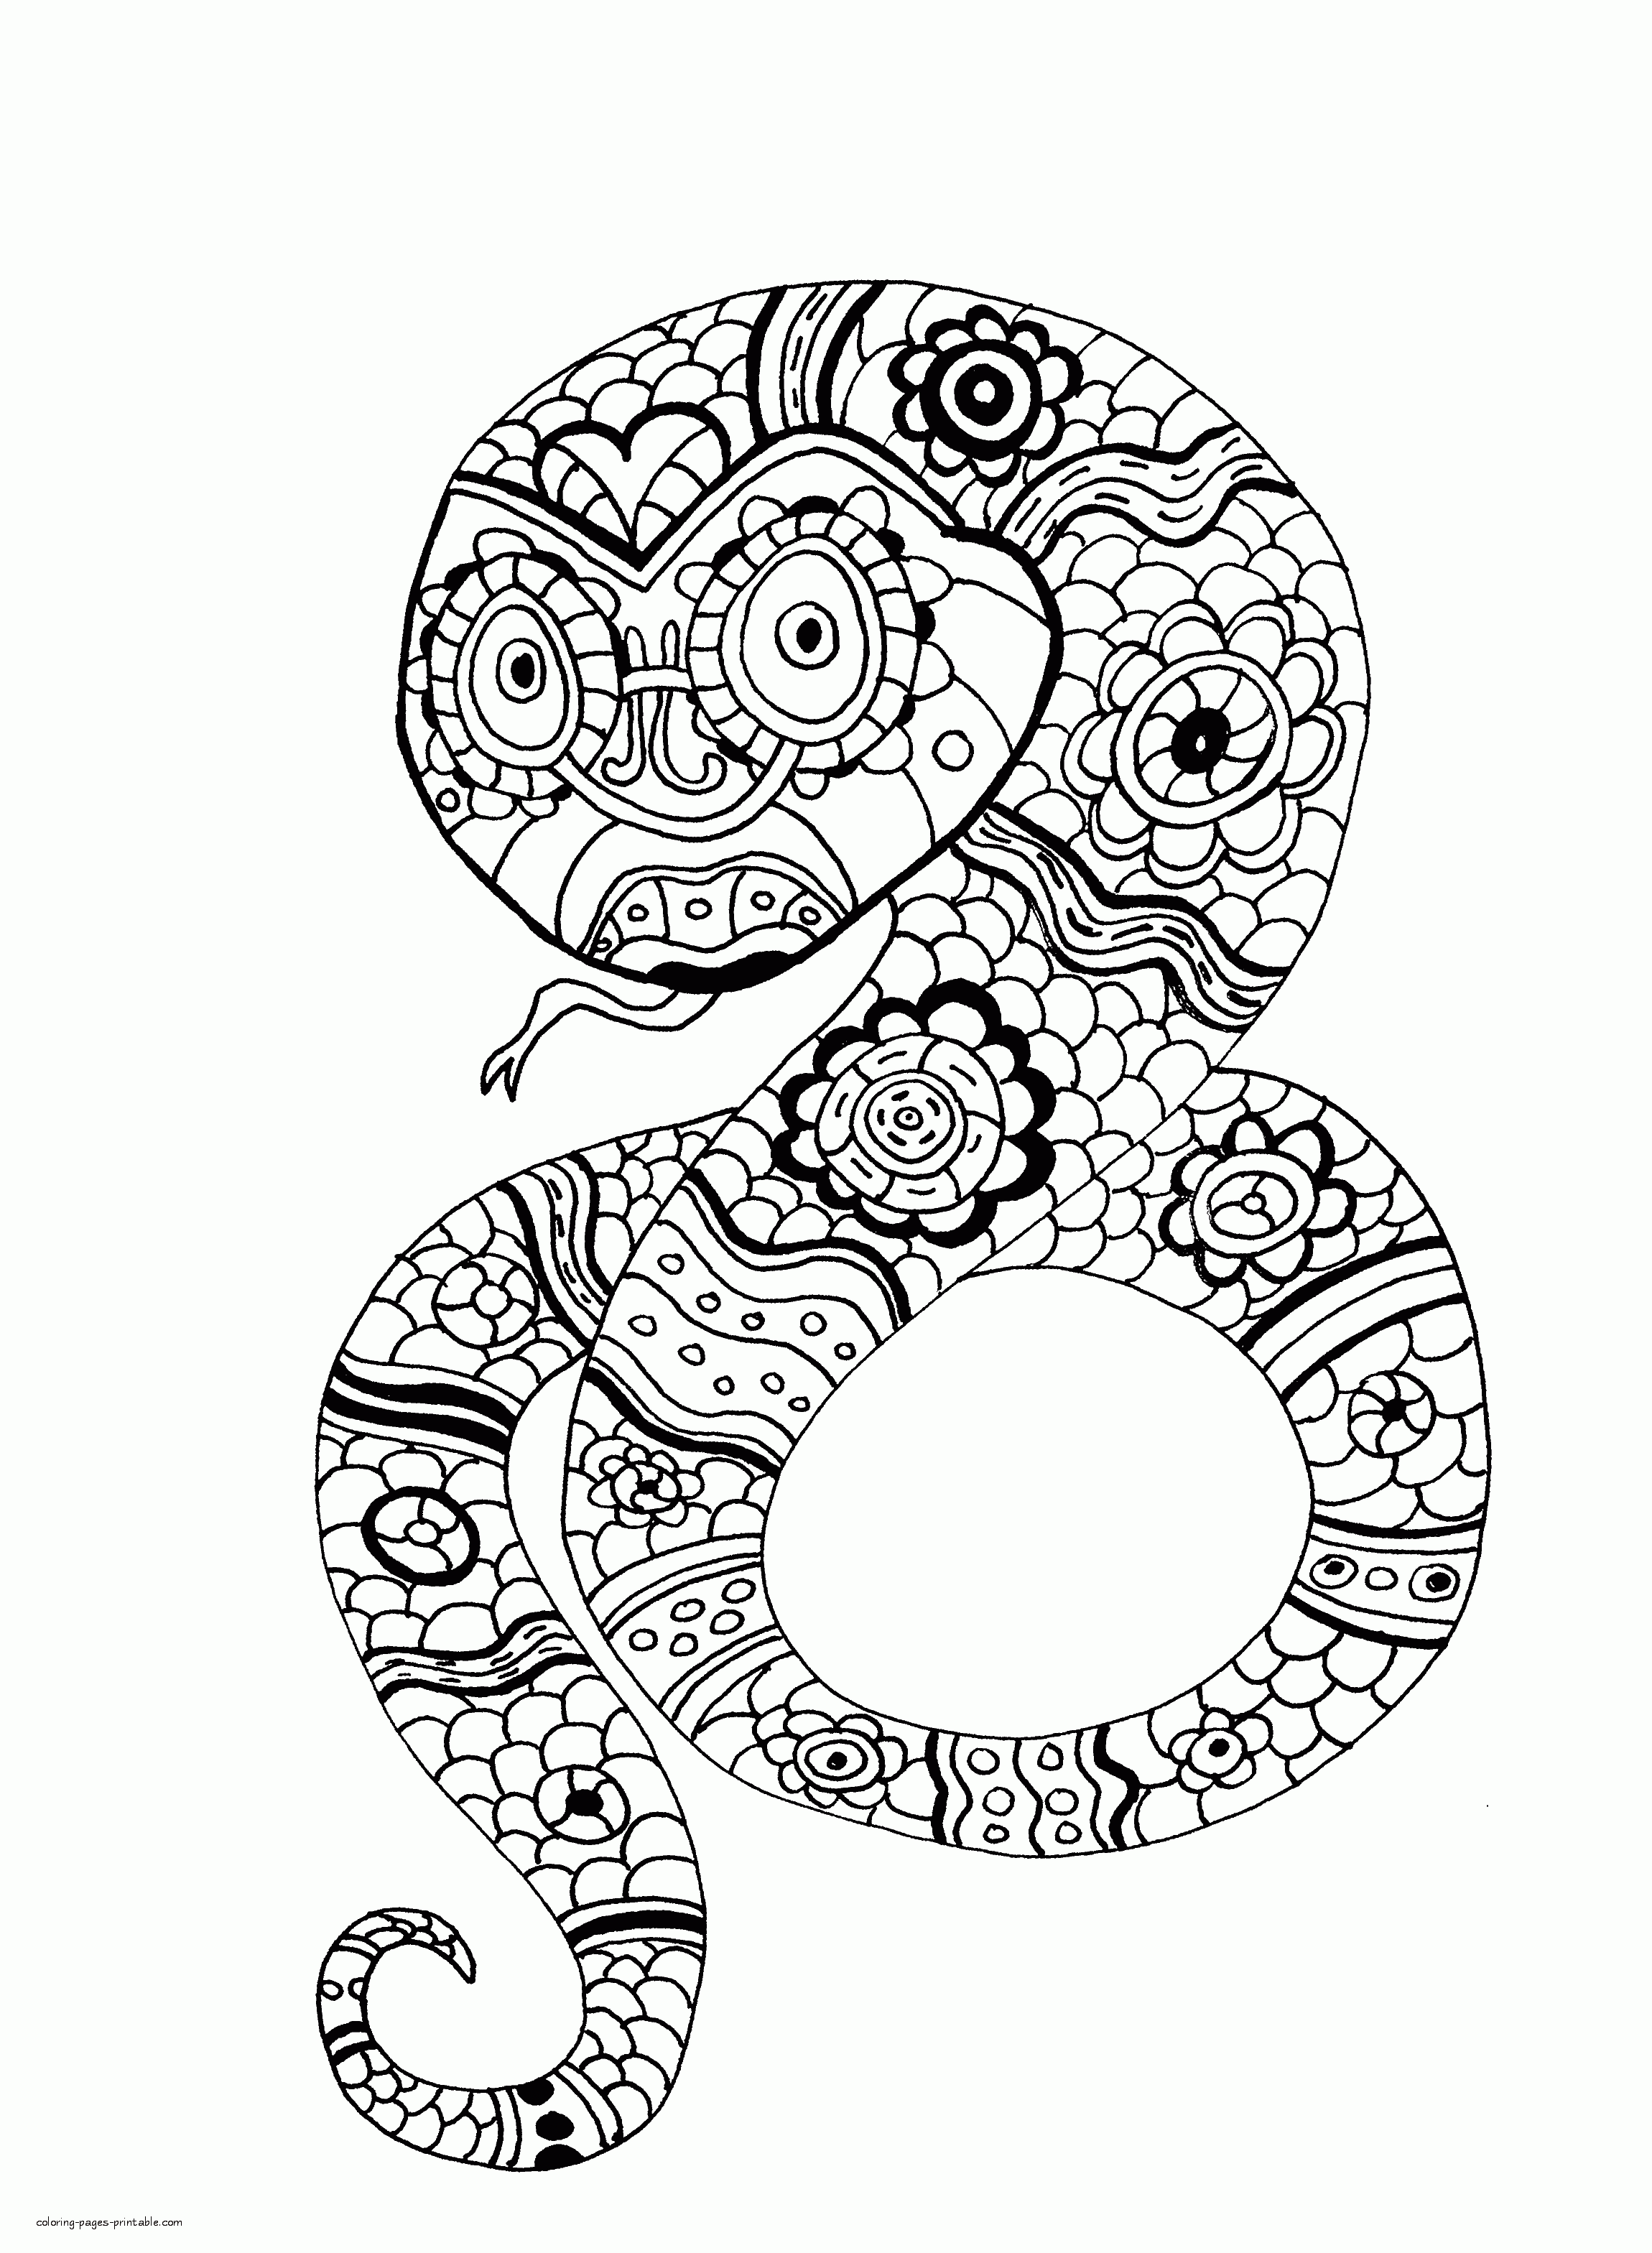 Snake Coloring Page For Adults  COLORING-PAGES-PRINTABLE.COM